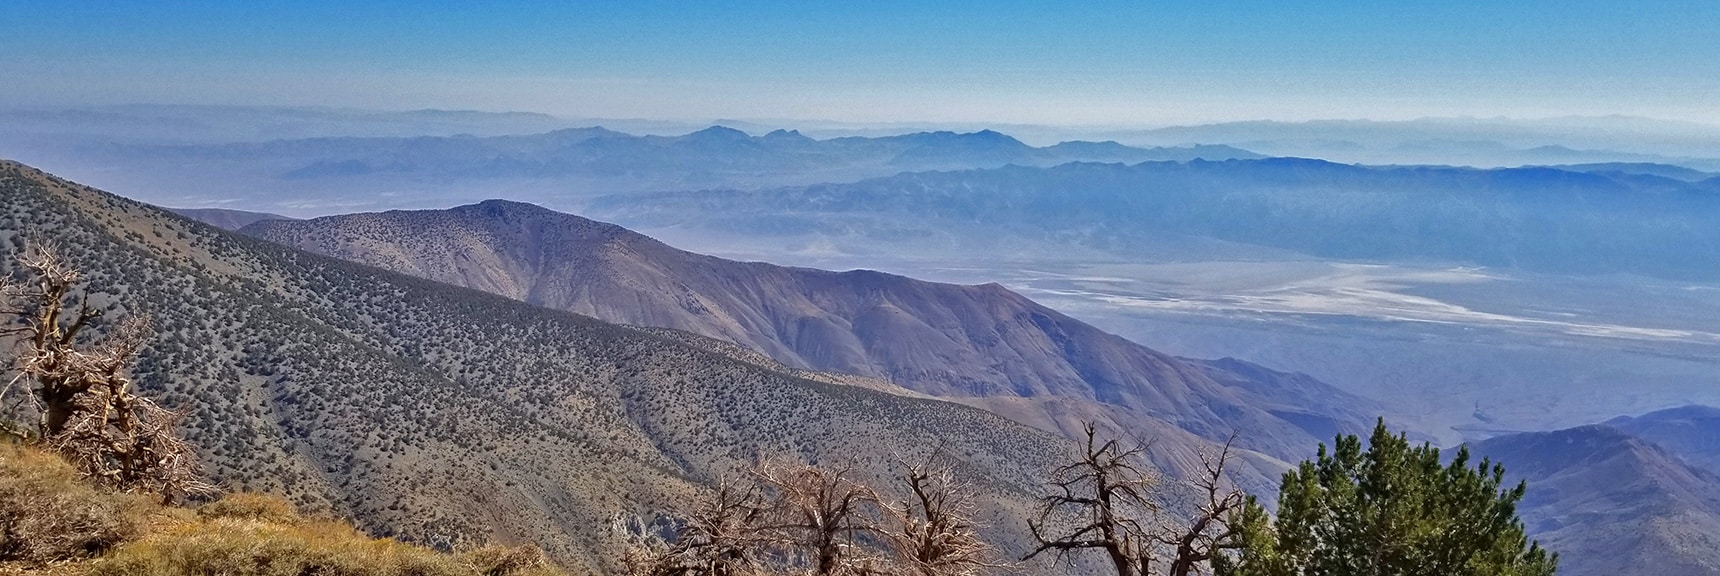 A Look Down to Bad Water, Devil's Golf Course and Funeral Mountains in Death Valley | Telescope Peak Summit from Wildrose Charcoal Kilns Parking Area, Panamint Mountains, Death Valley National Park, California